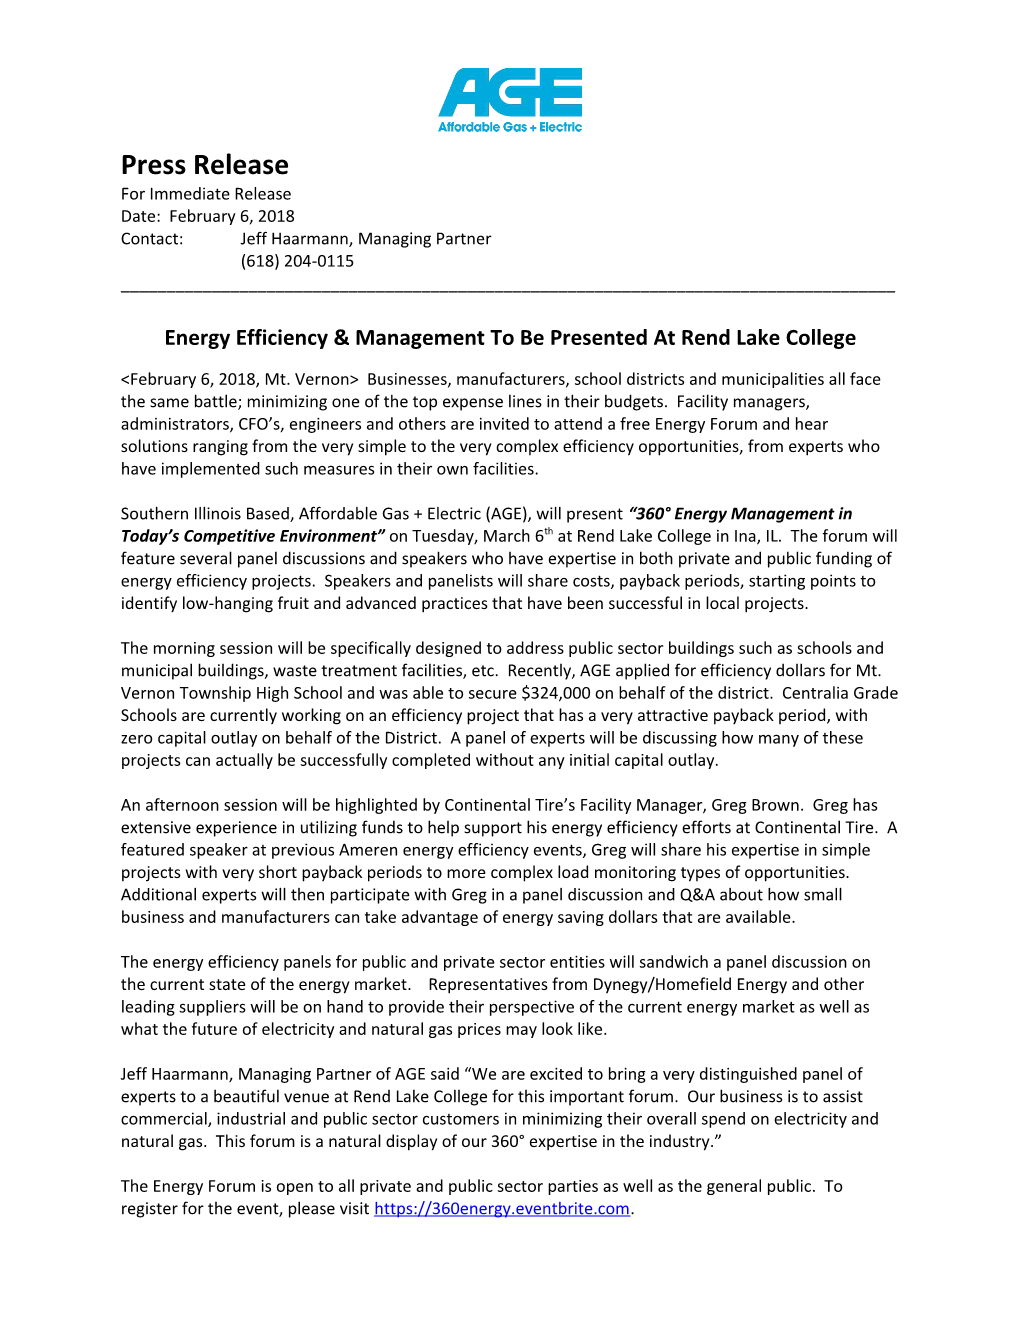 Energy Efficiency & Management to Be Presented at Rend Lake College